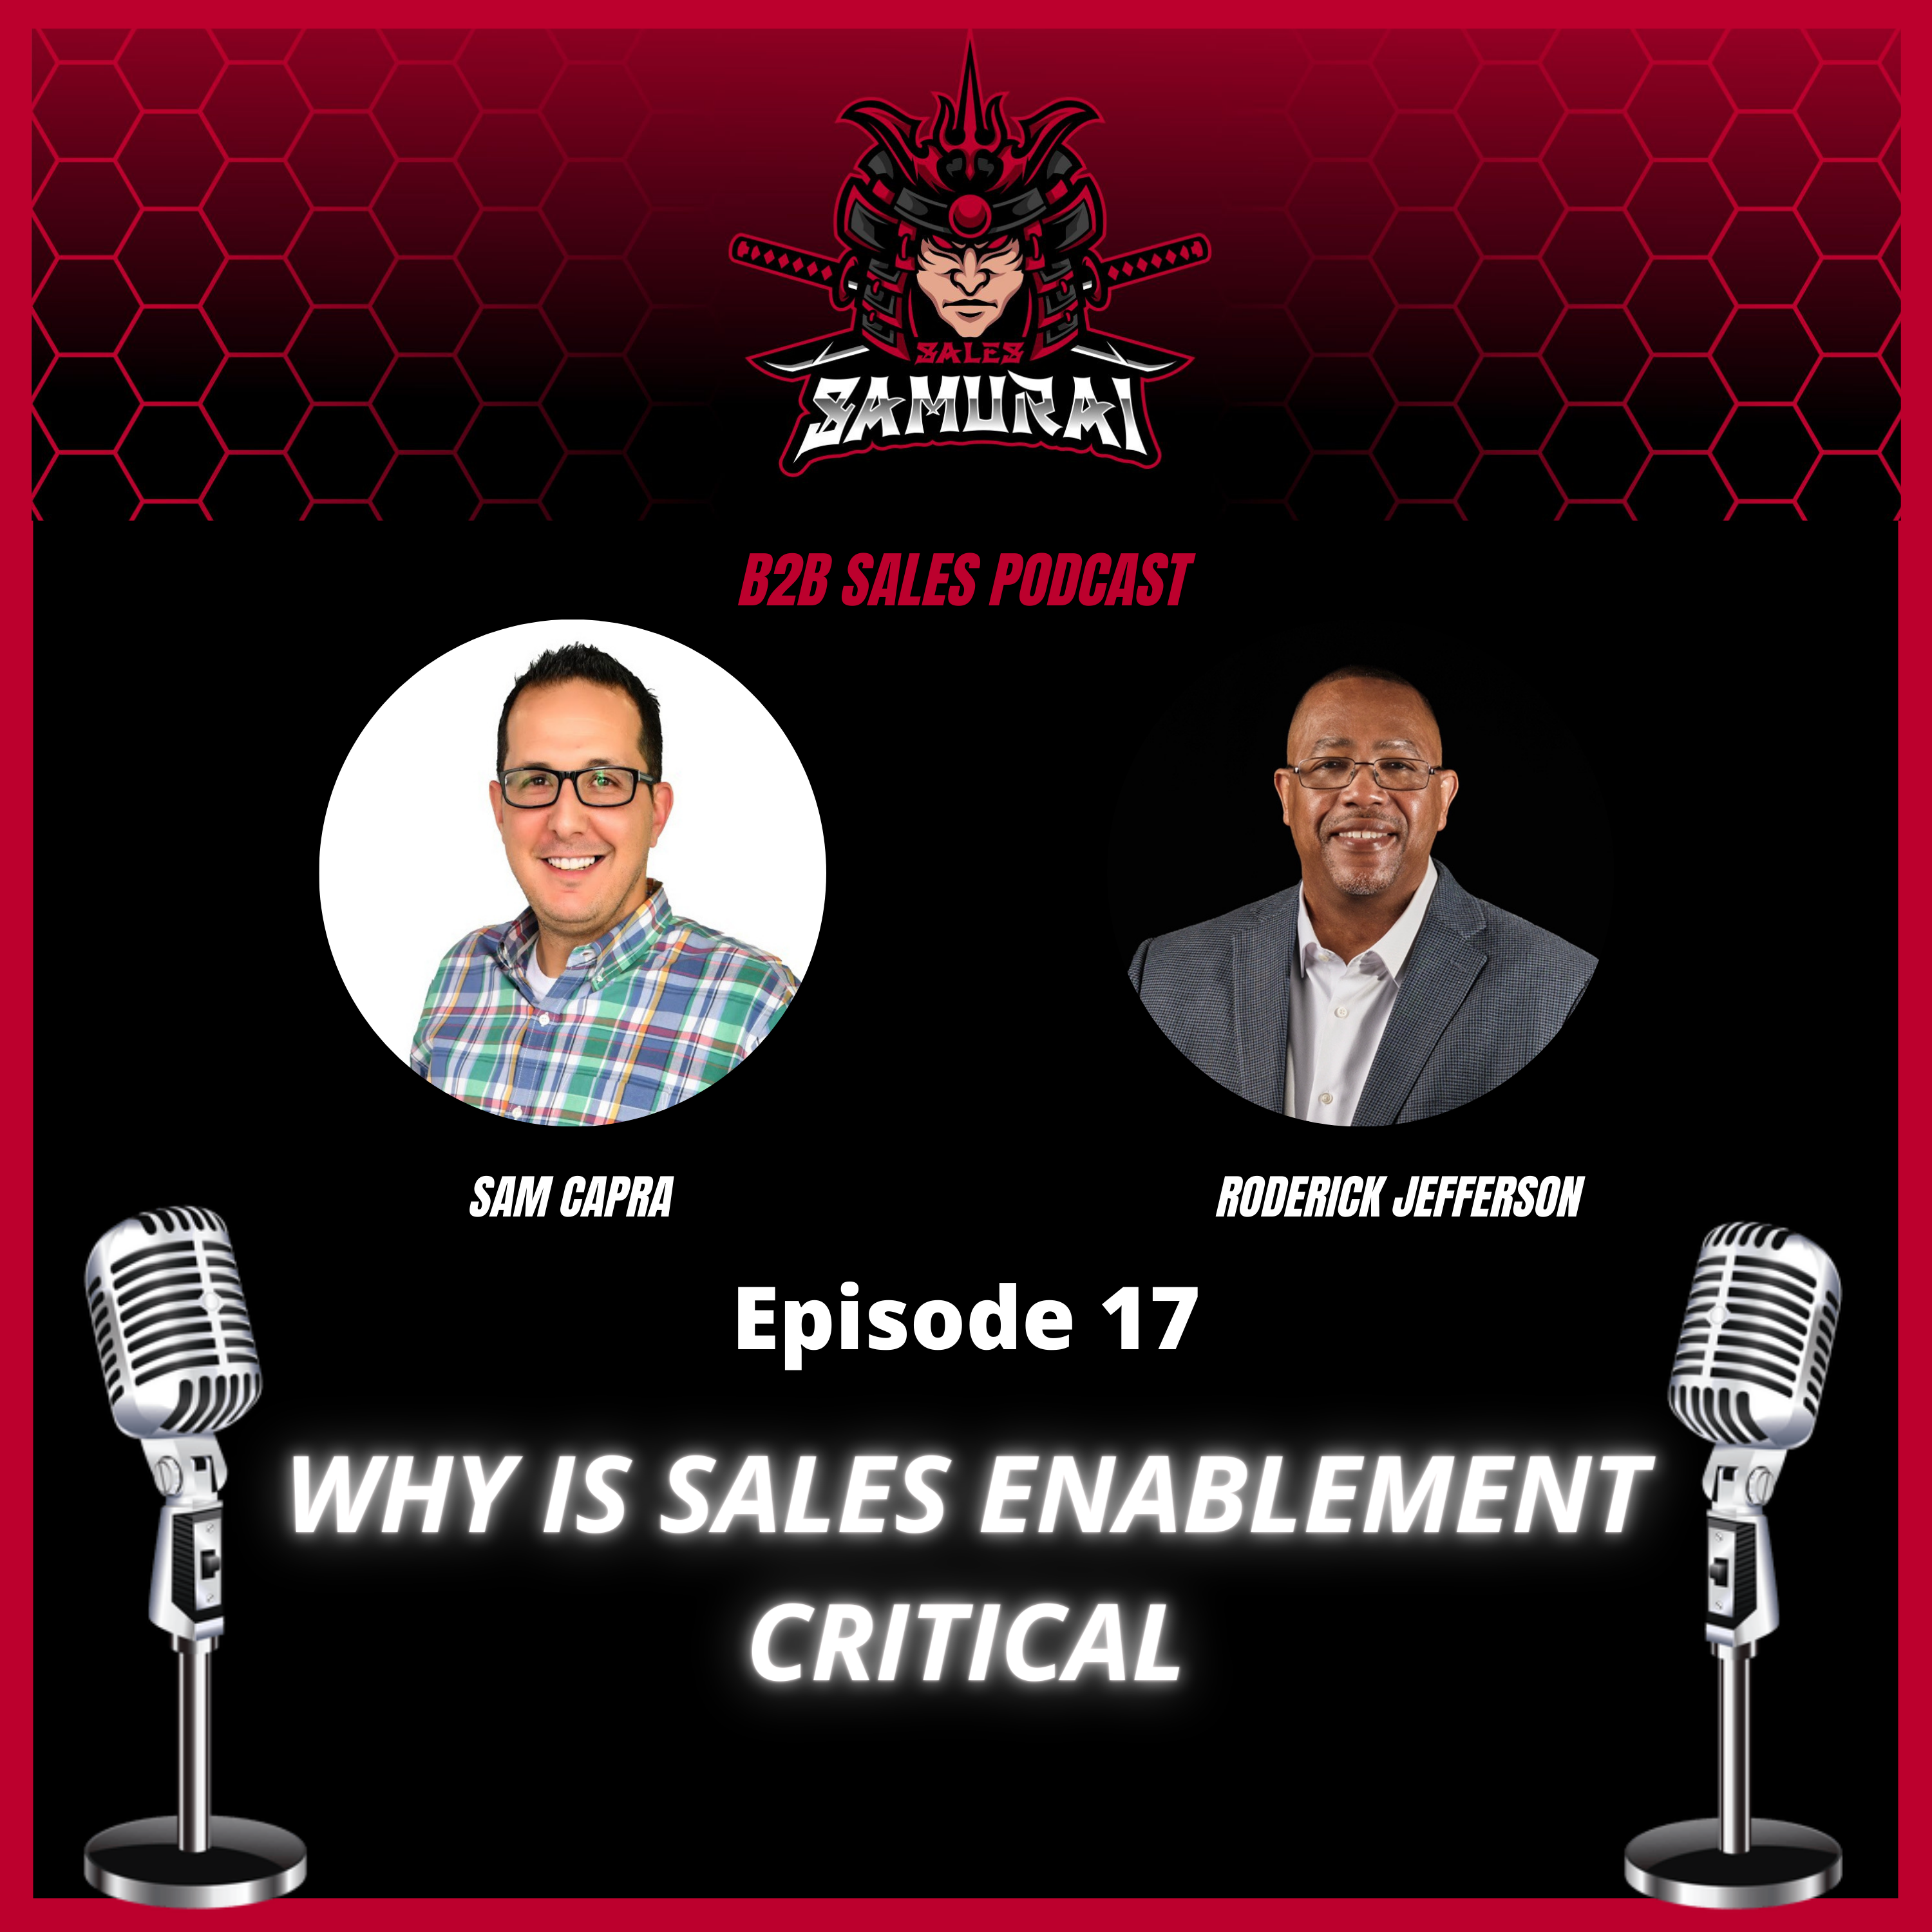 Why is Sales Enablement CRITICAL Image